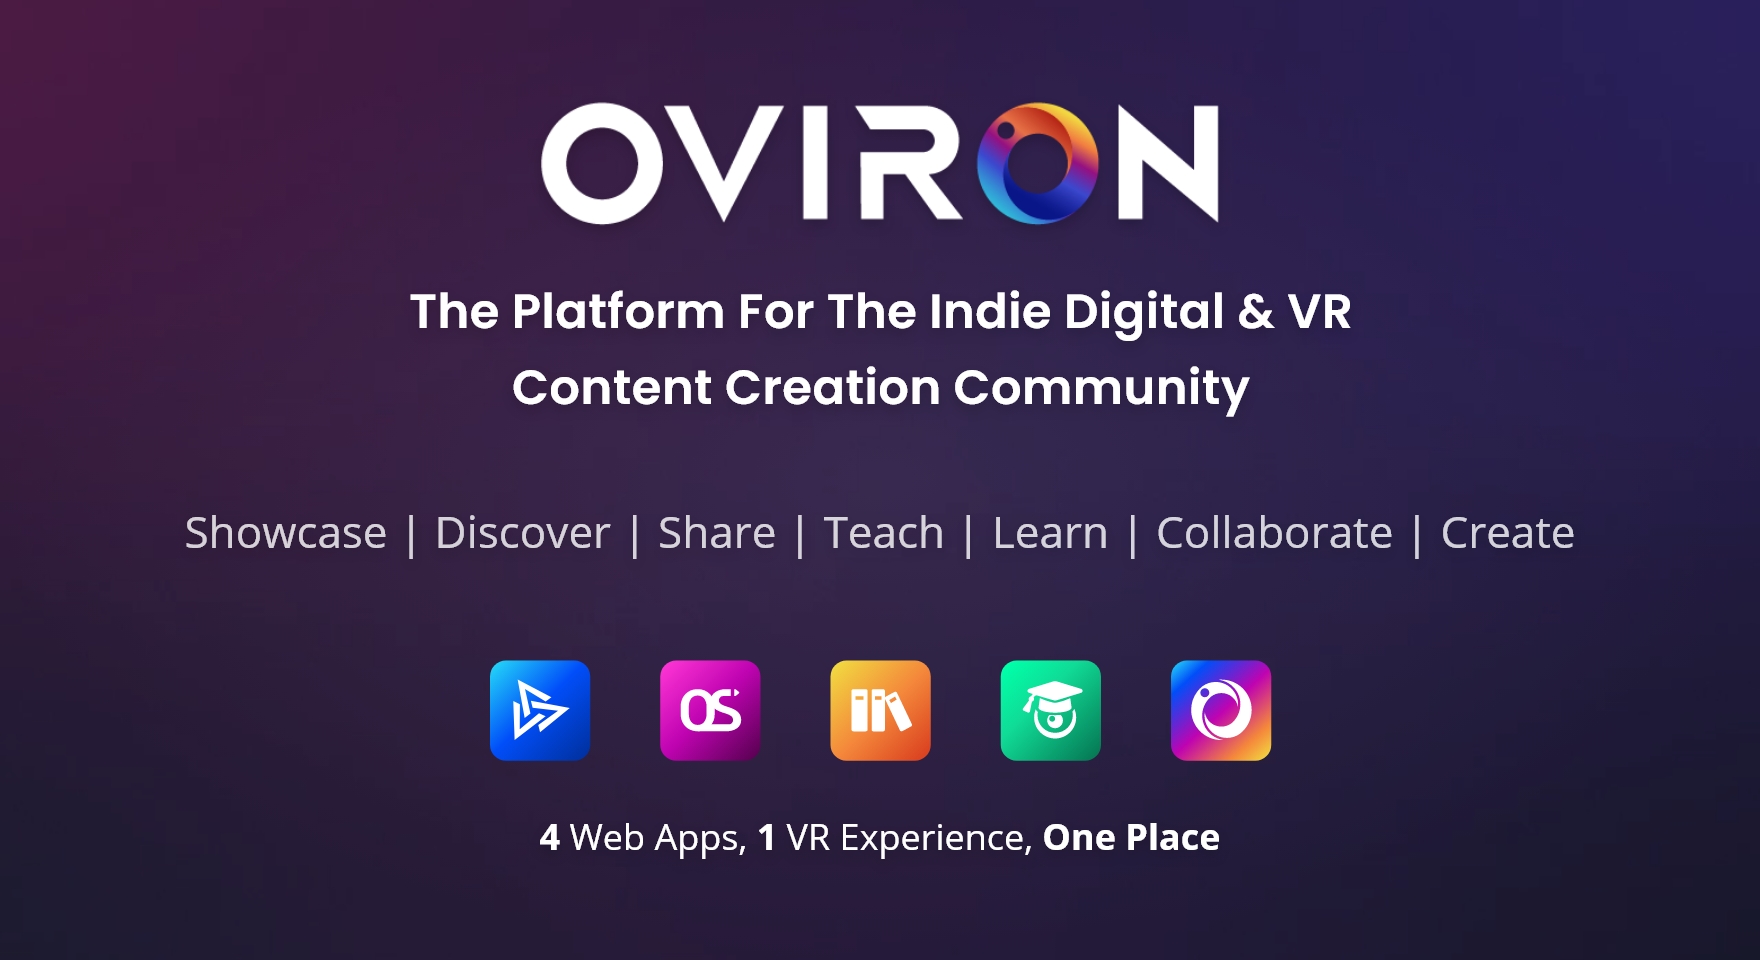 OVIRON, the platform for the indie Digital & VR content creation community